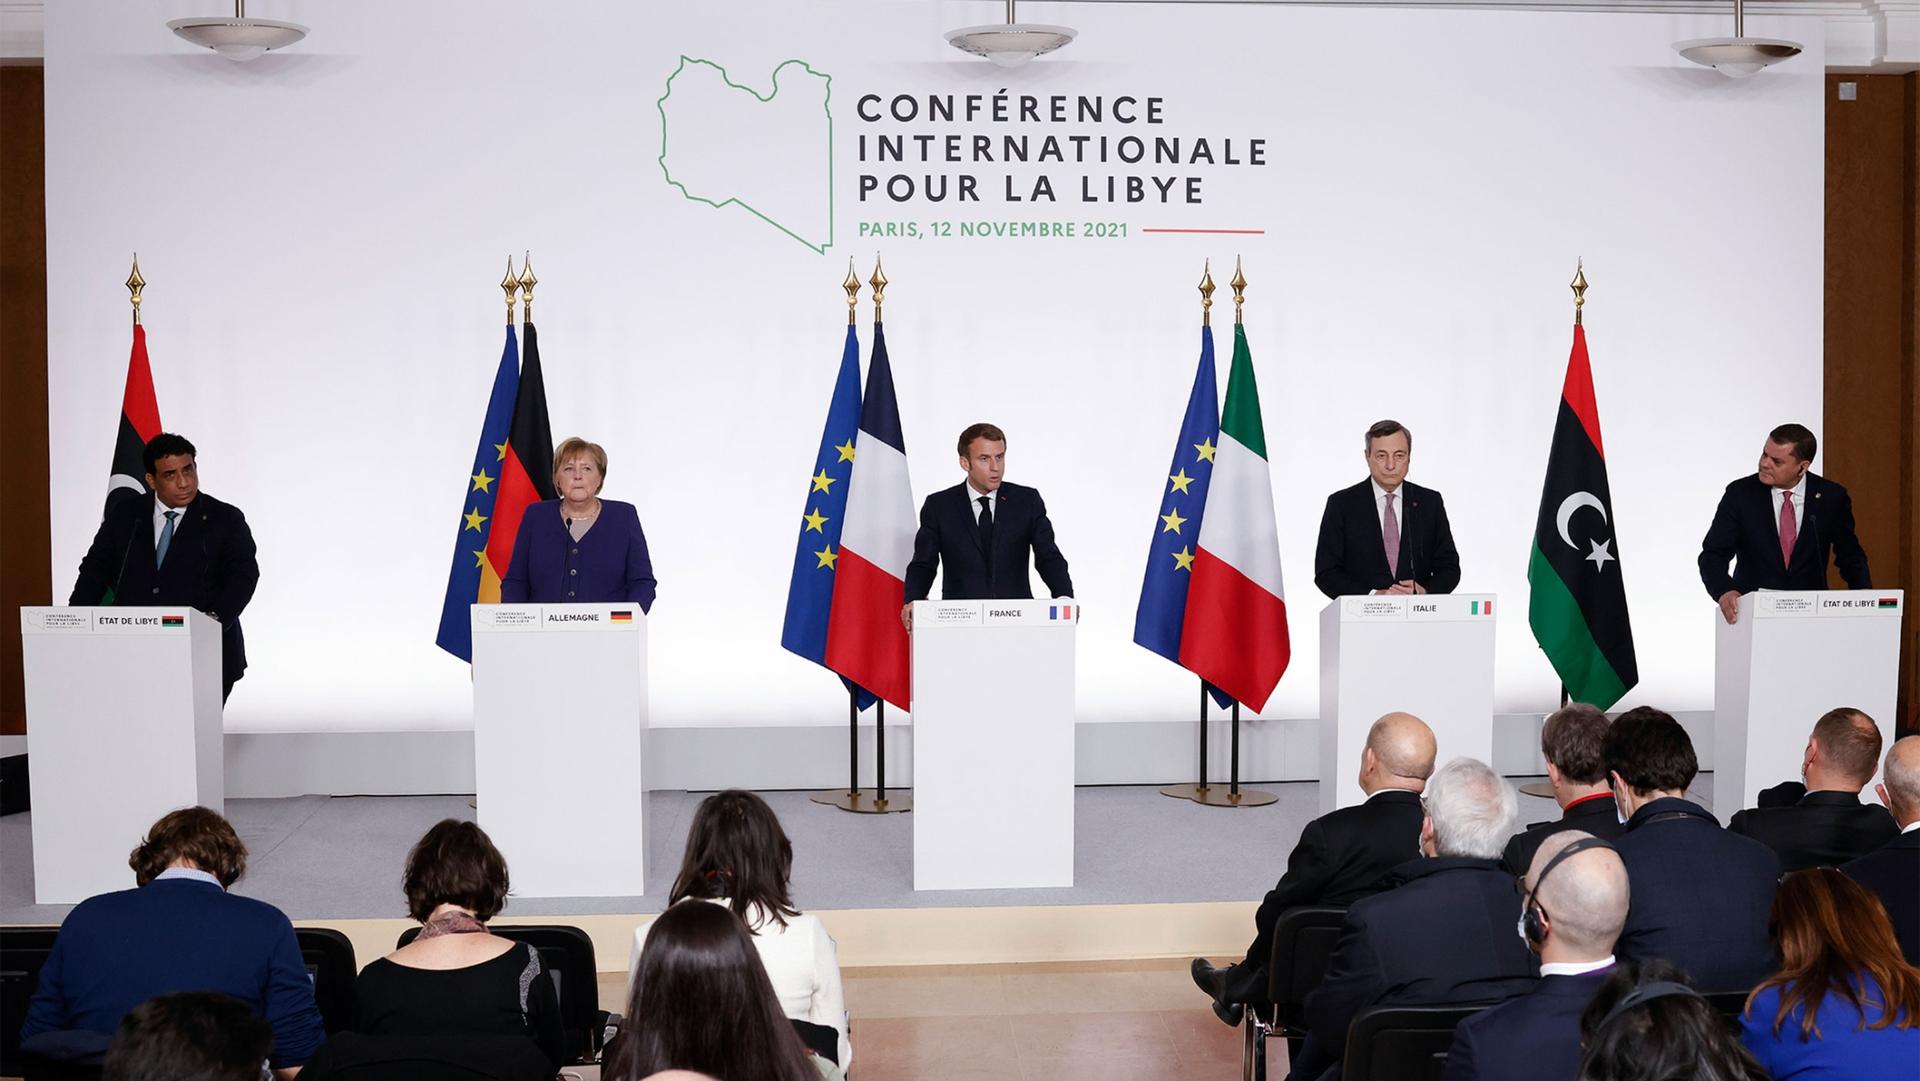 Head of the Presidential Council of Libya Mohamed al-Manfi, German Chancellor Angela Merkel, French President Emmanuel Macron, Italian Prime Minister Mario Draghi and Libyan Prime Minister Abdul Hamid Dbeibah attend a press conference on Libya in Paris